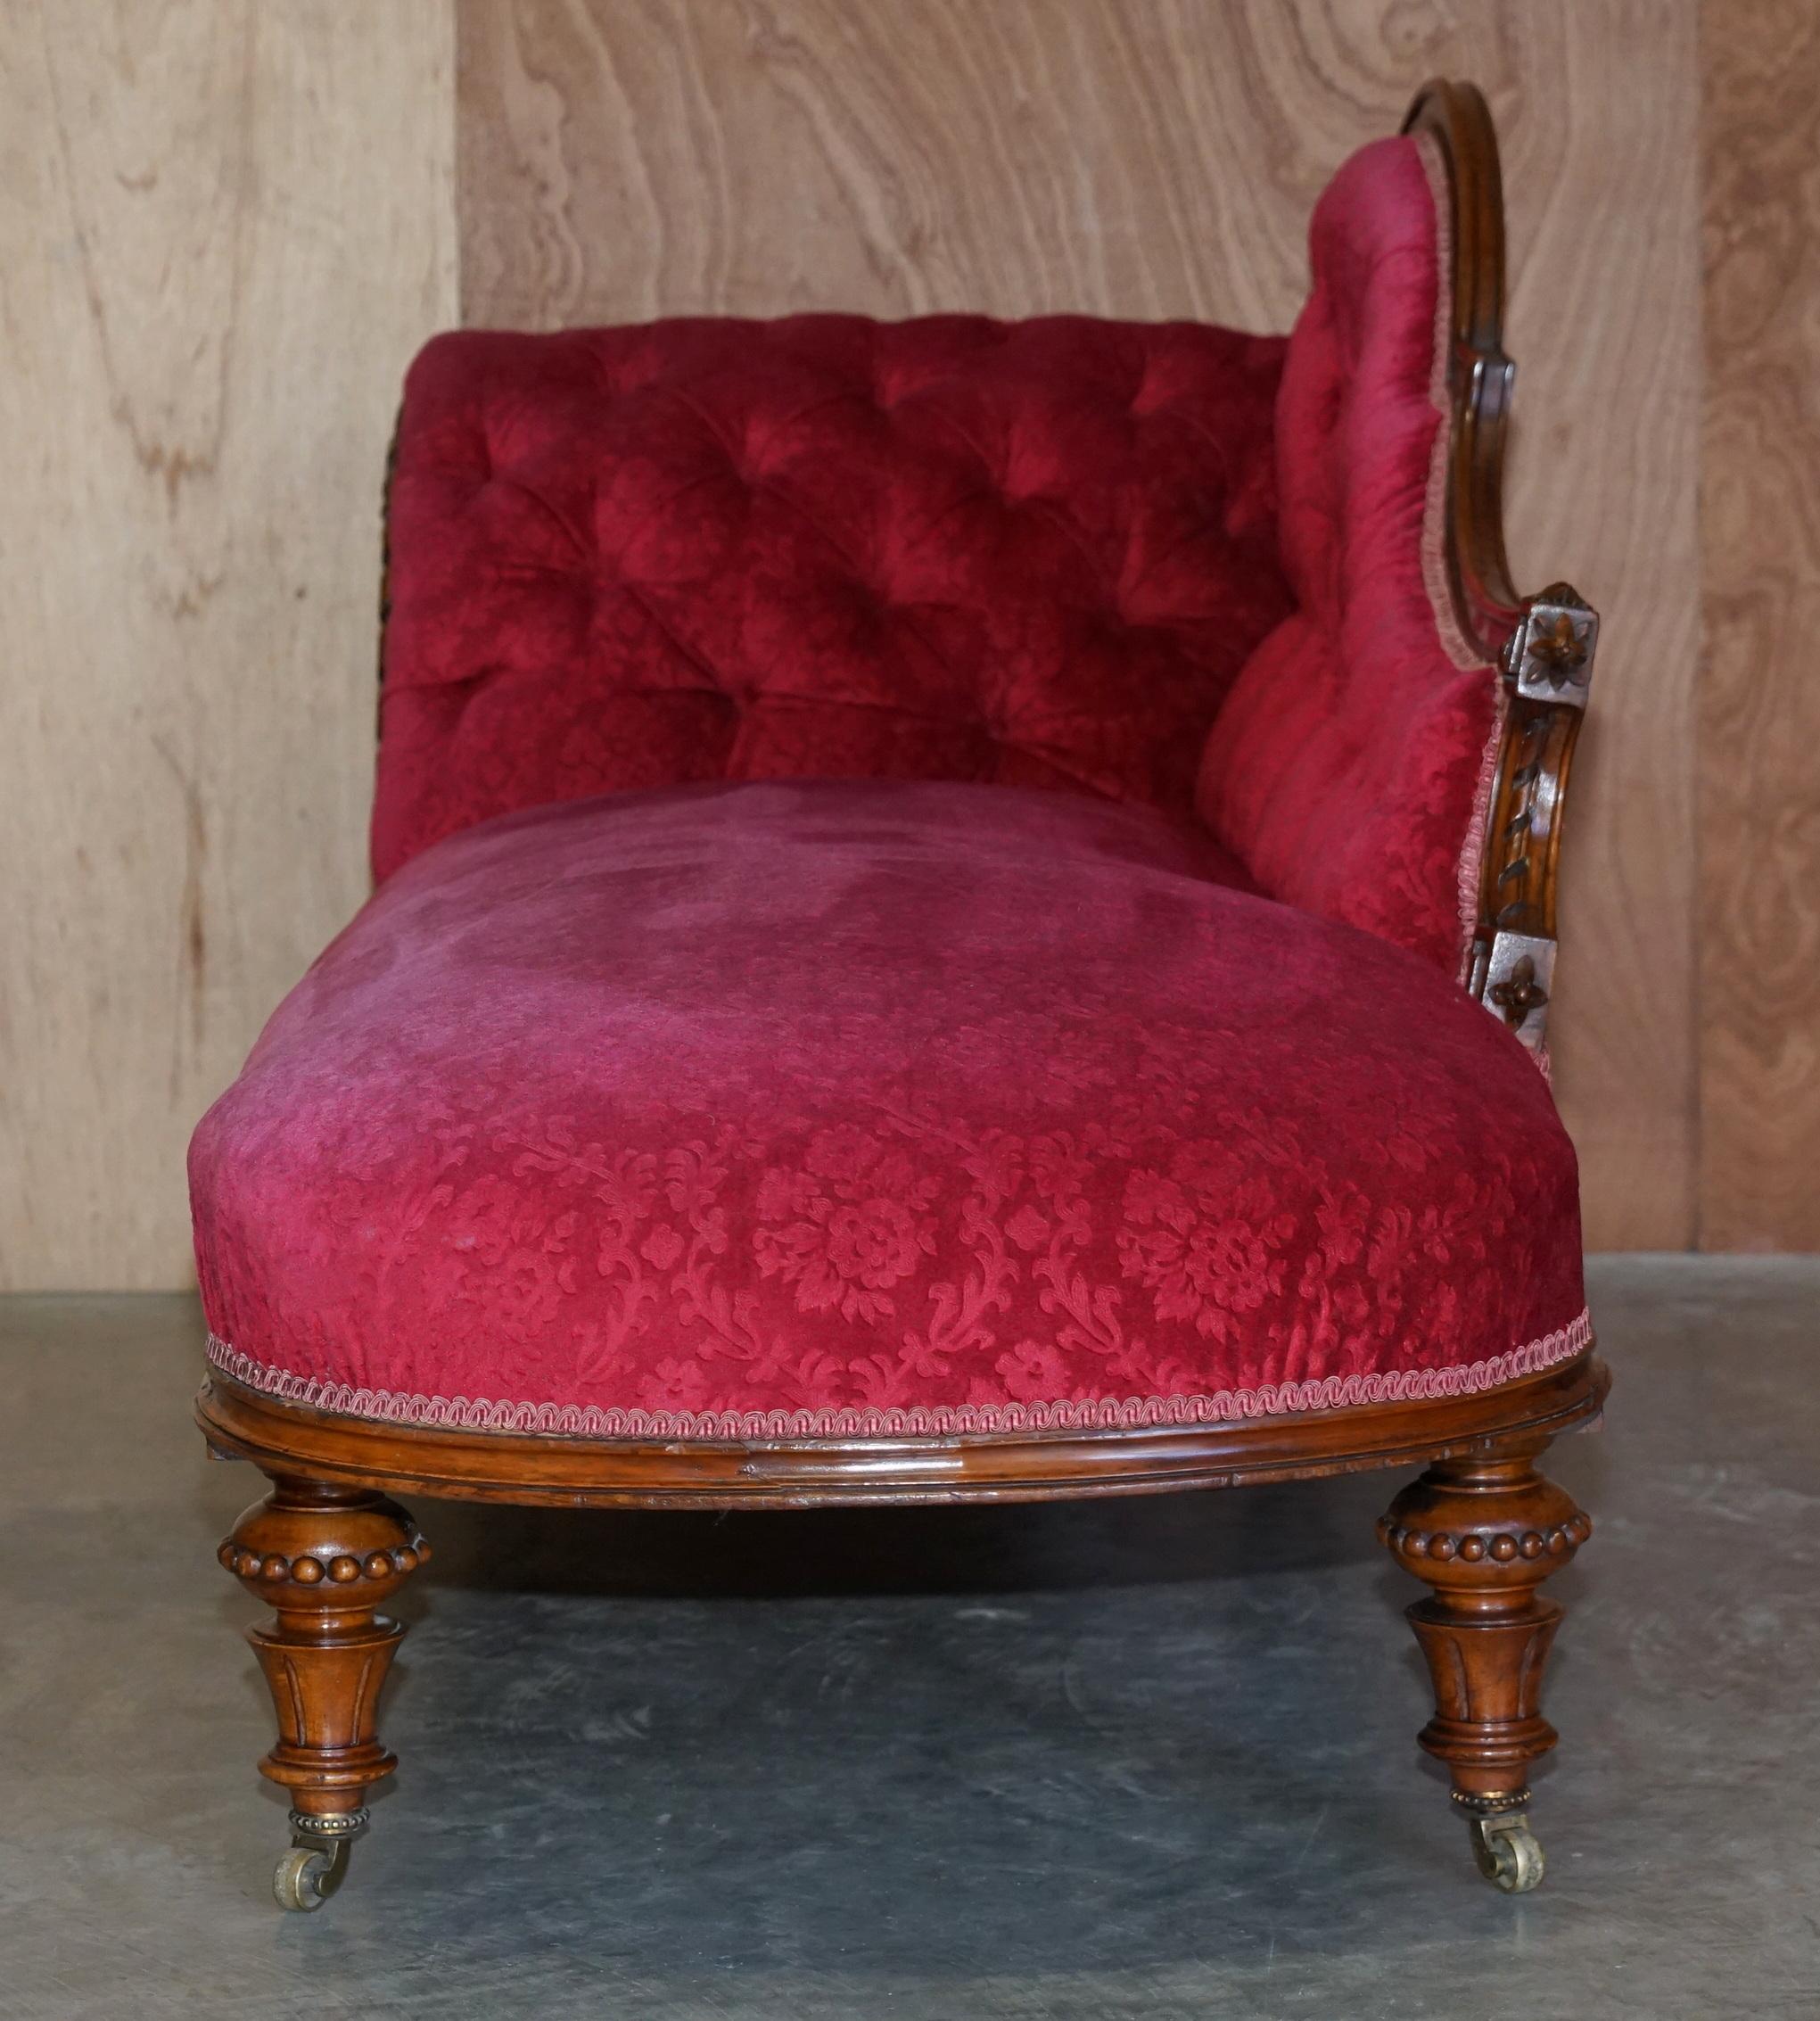 Restored Antique Howard & Son's Berners Street Chesterfield Chaise Lounge Sofa For Sale 9